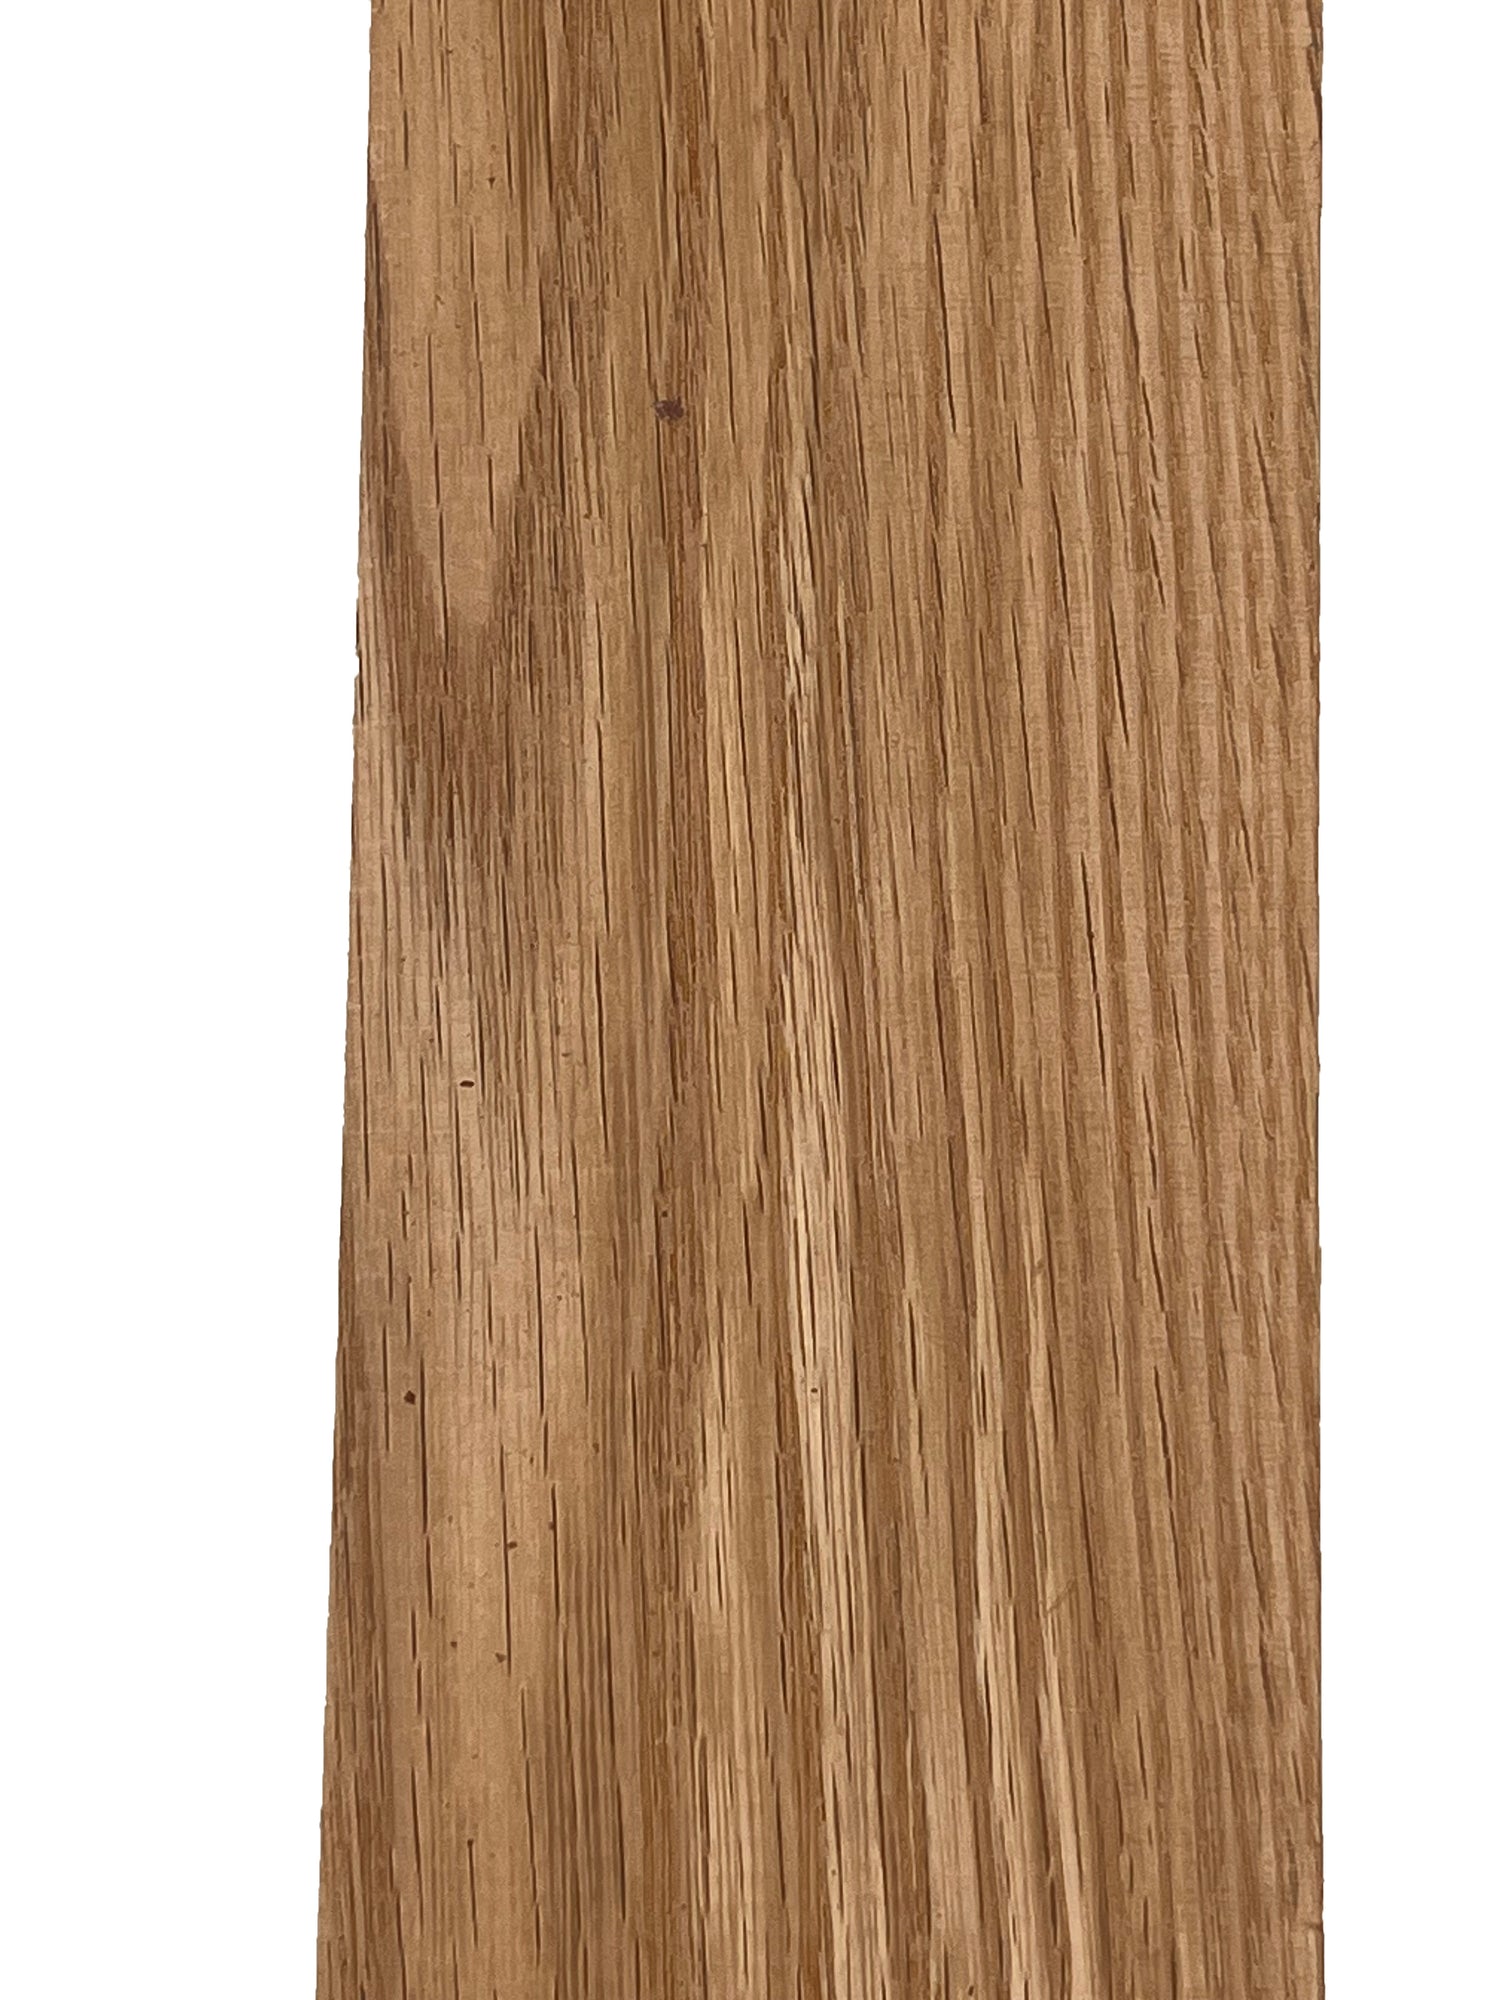 Red Oak Lumber Board - 3/4&quot; x 2&quot; (4 Pieces) - Exotic Wood Zone - Buy online Across USA 